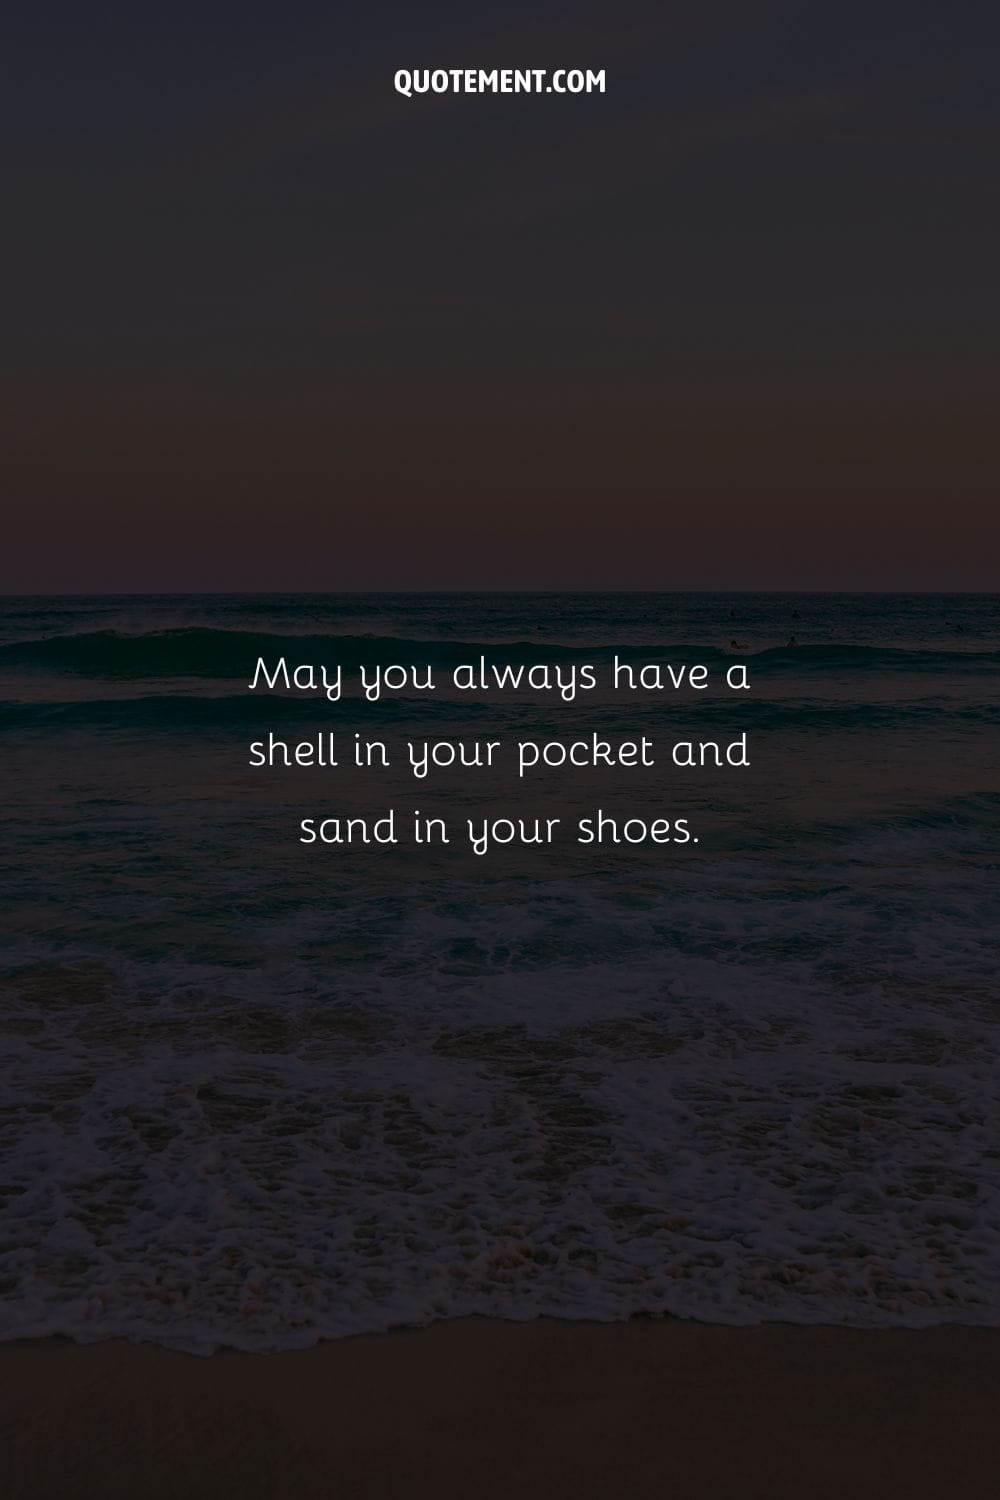 May you always have a shell in your pocket and sand in your shoes.